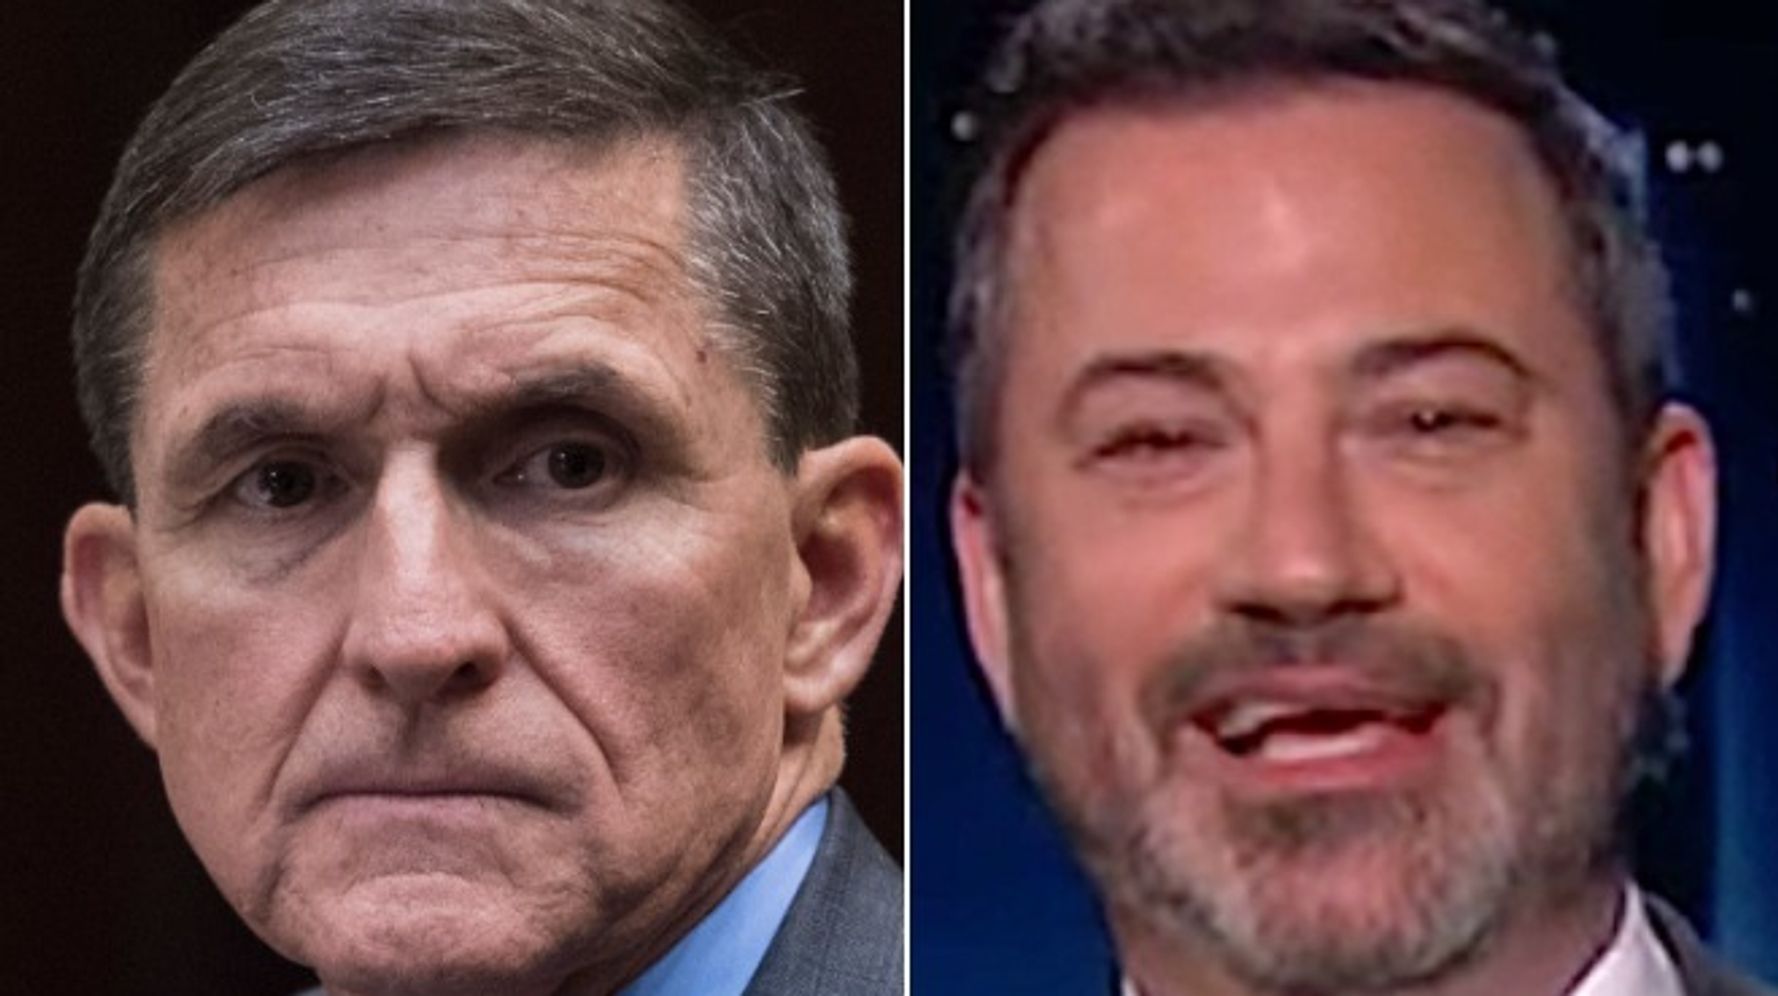 Michael Flynn Flubs The Pledge, And Jimmy Kimmel Has The Perfect Response